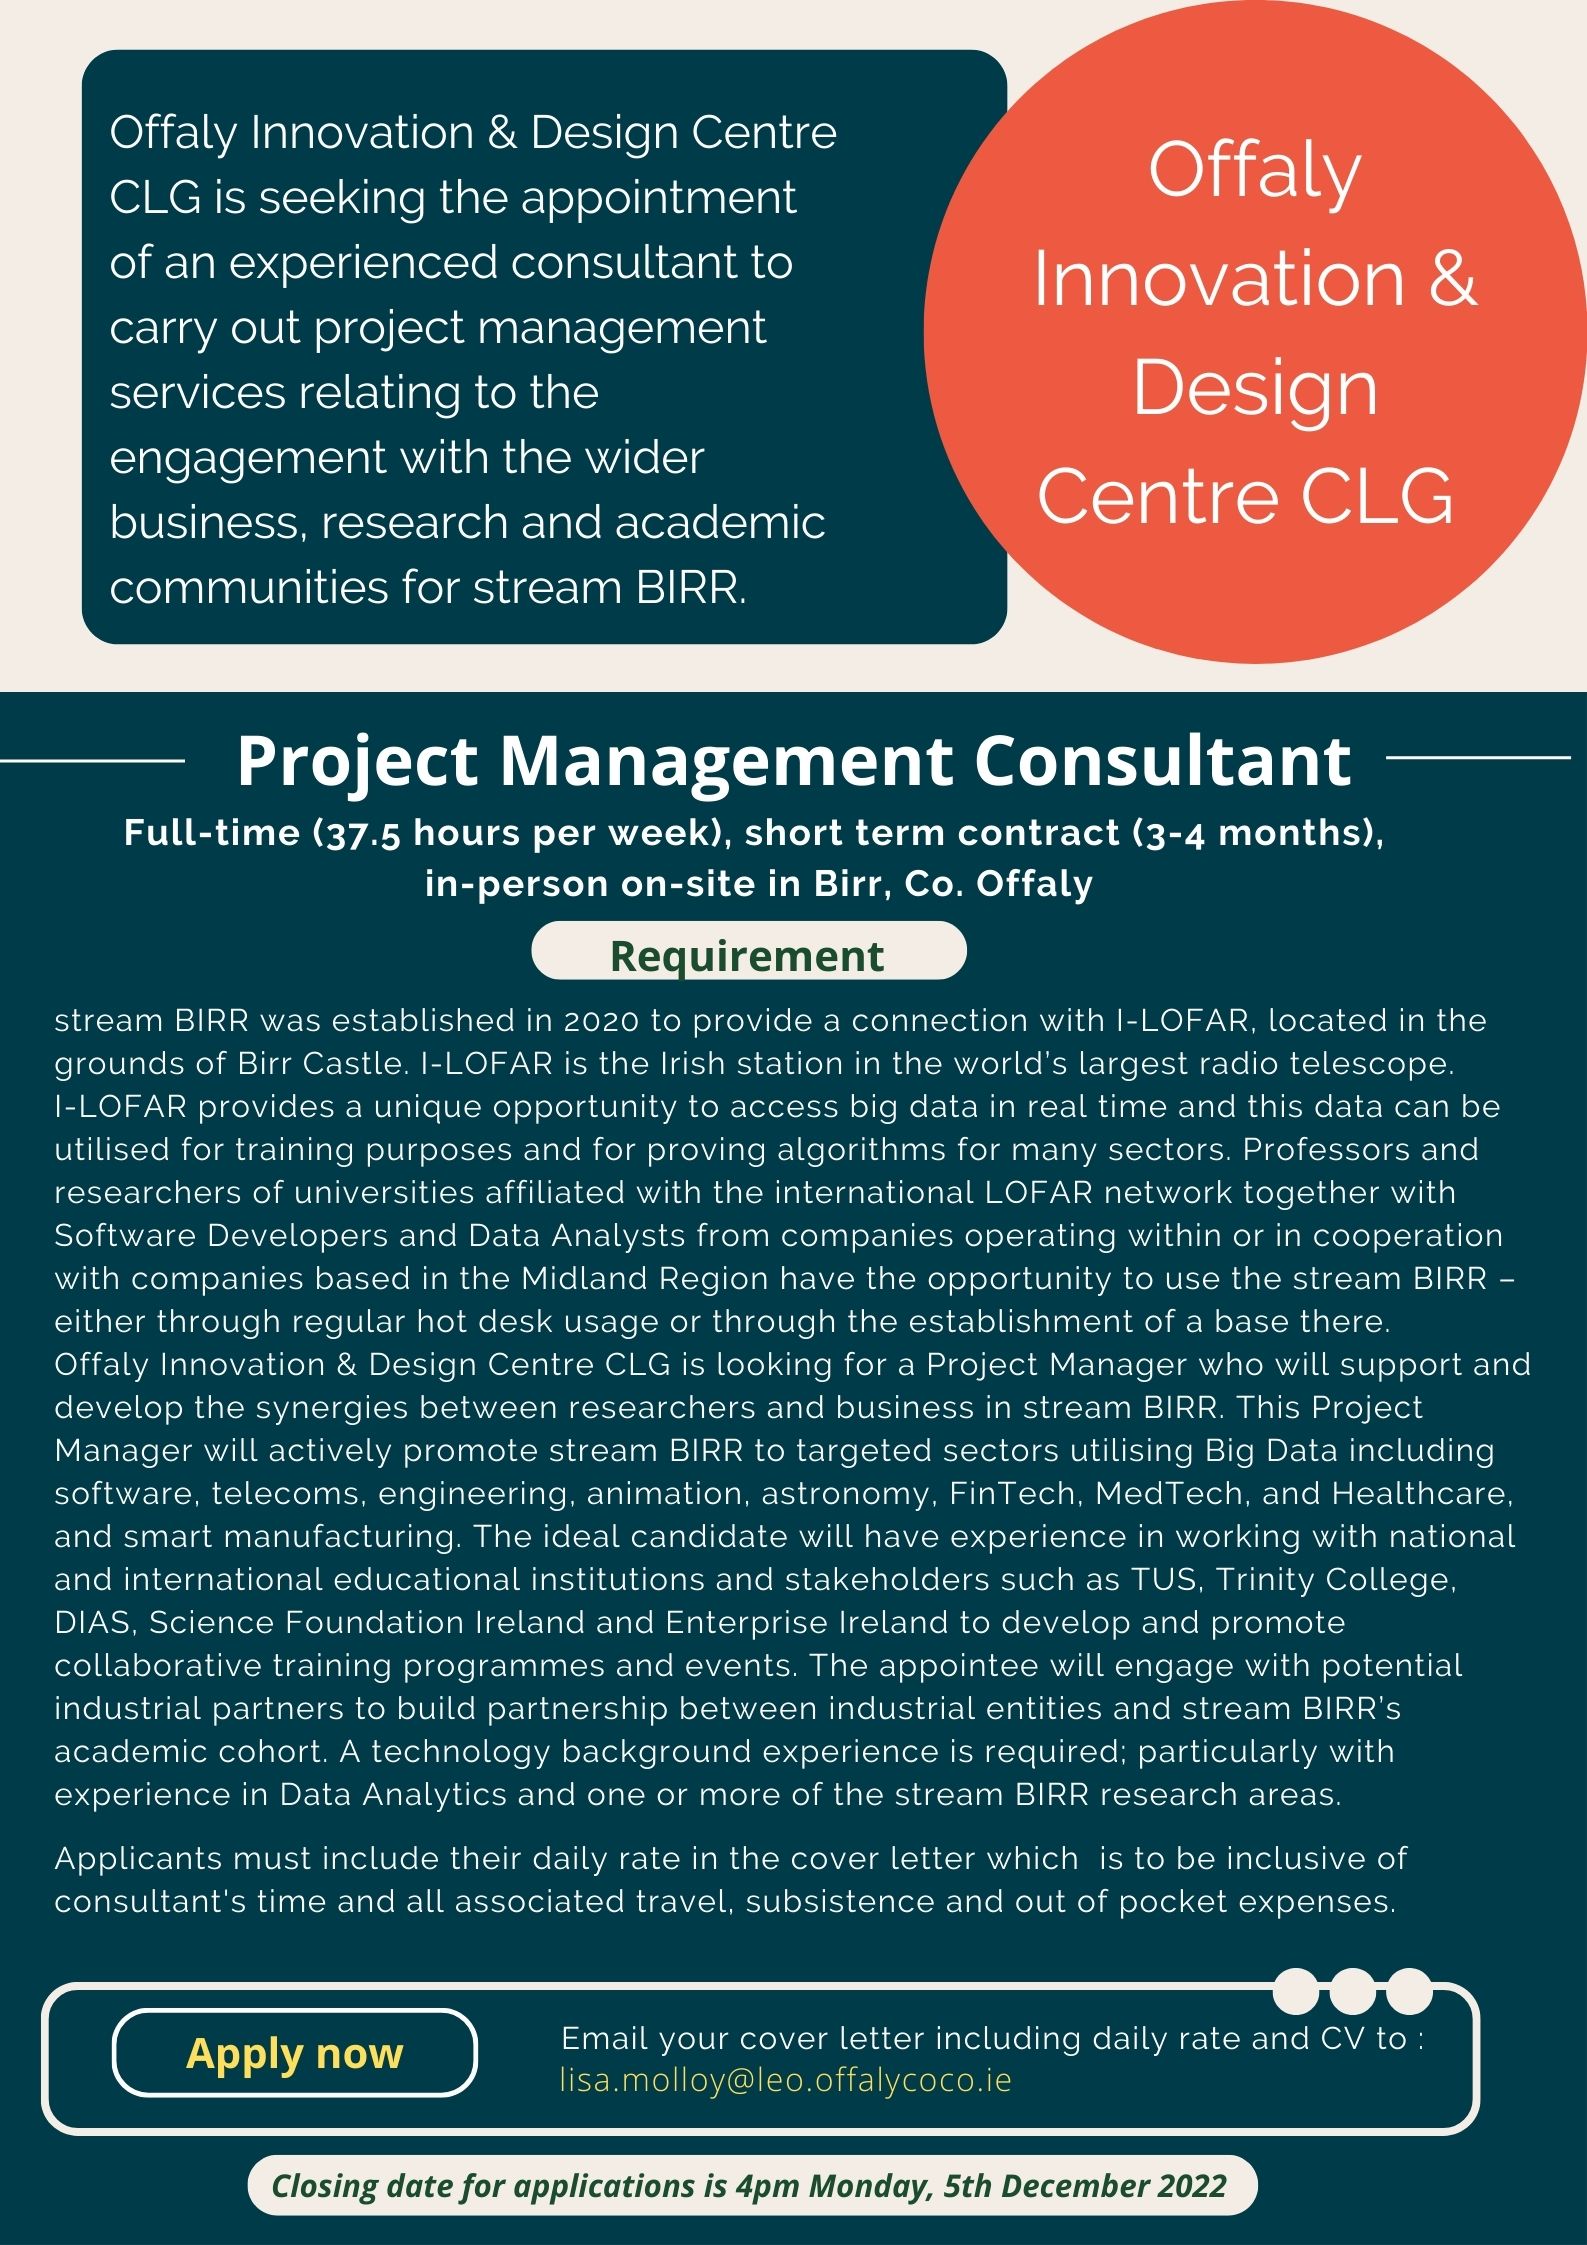 Project Management Consultant streamBIRR 2022 image